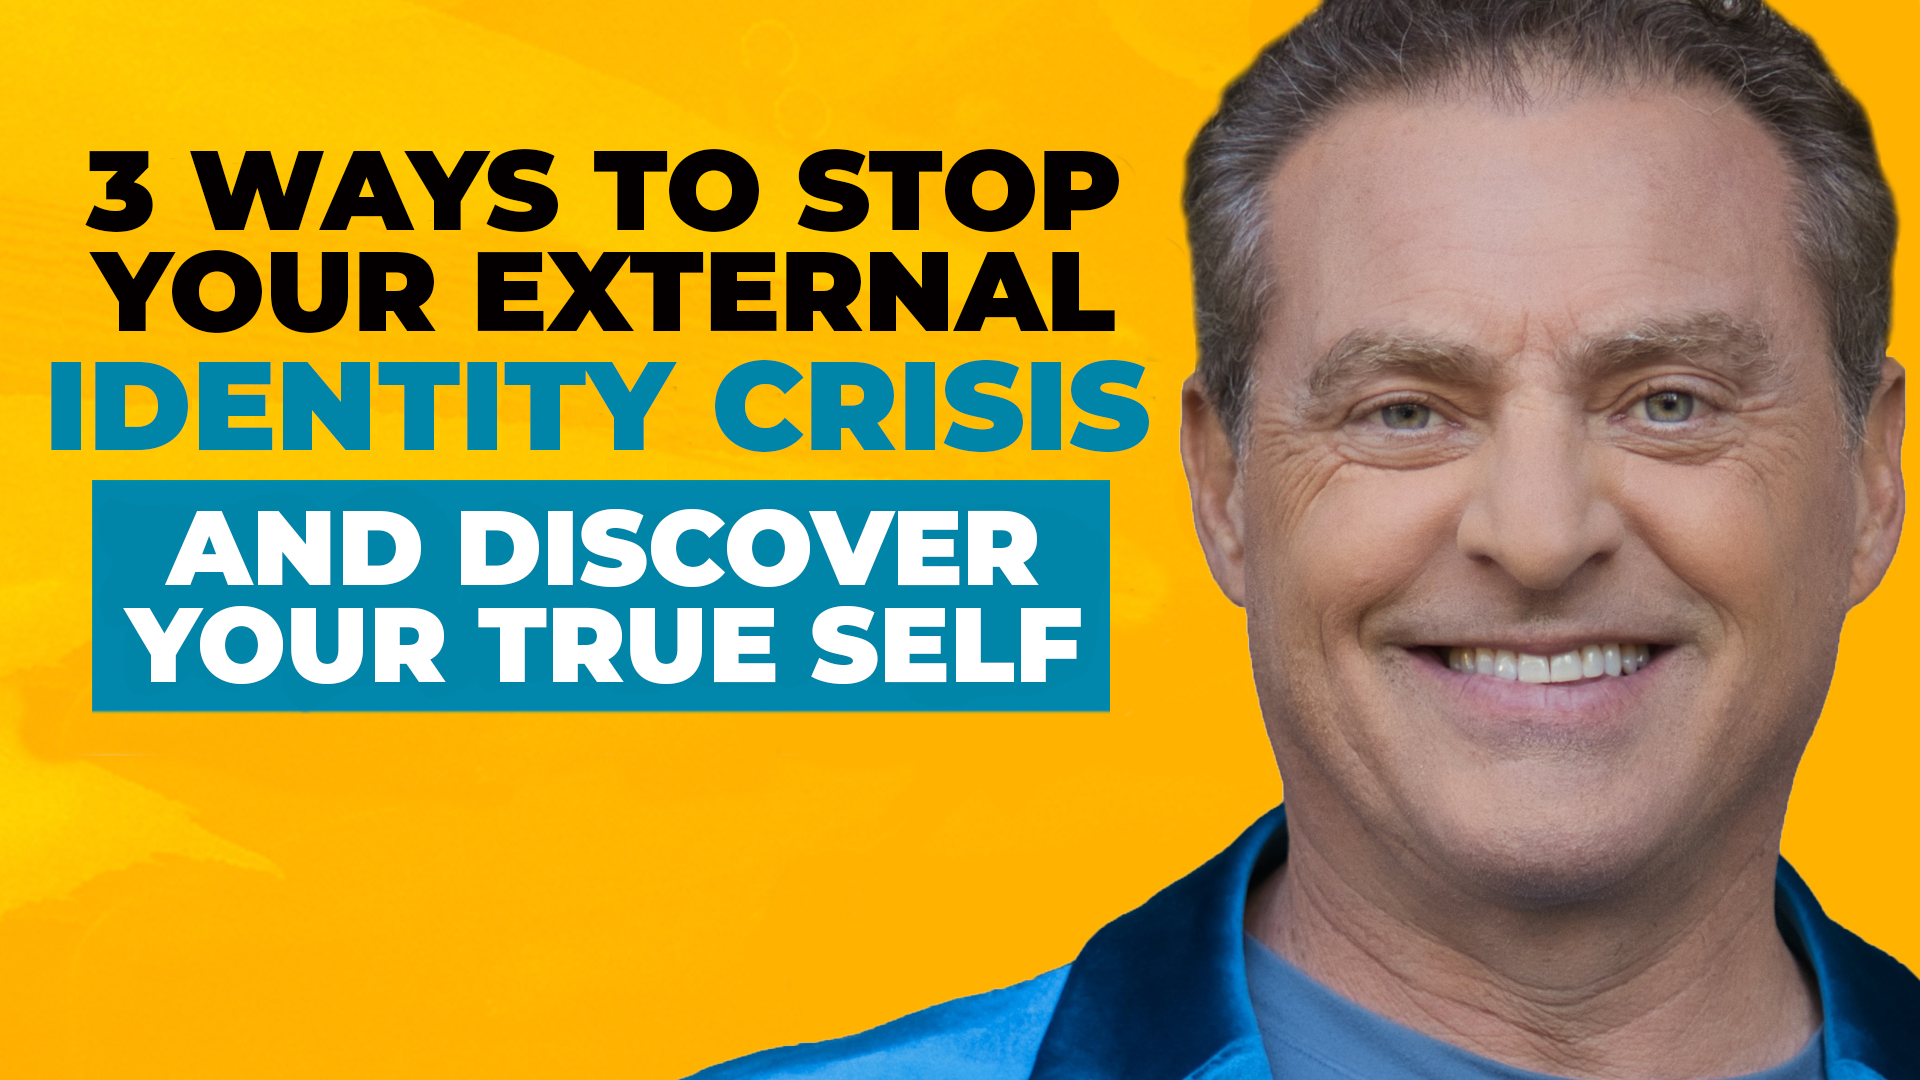 Headshot of Mike Koenigs on a bold yellow background, along with text reading "3 Ways to Stop Your External Identity Crisis and Discover Your True Self."